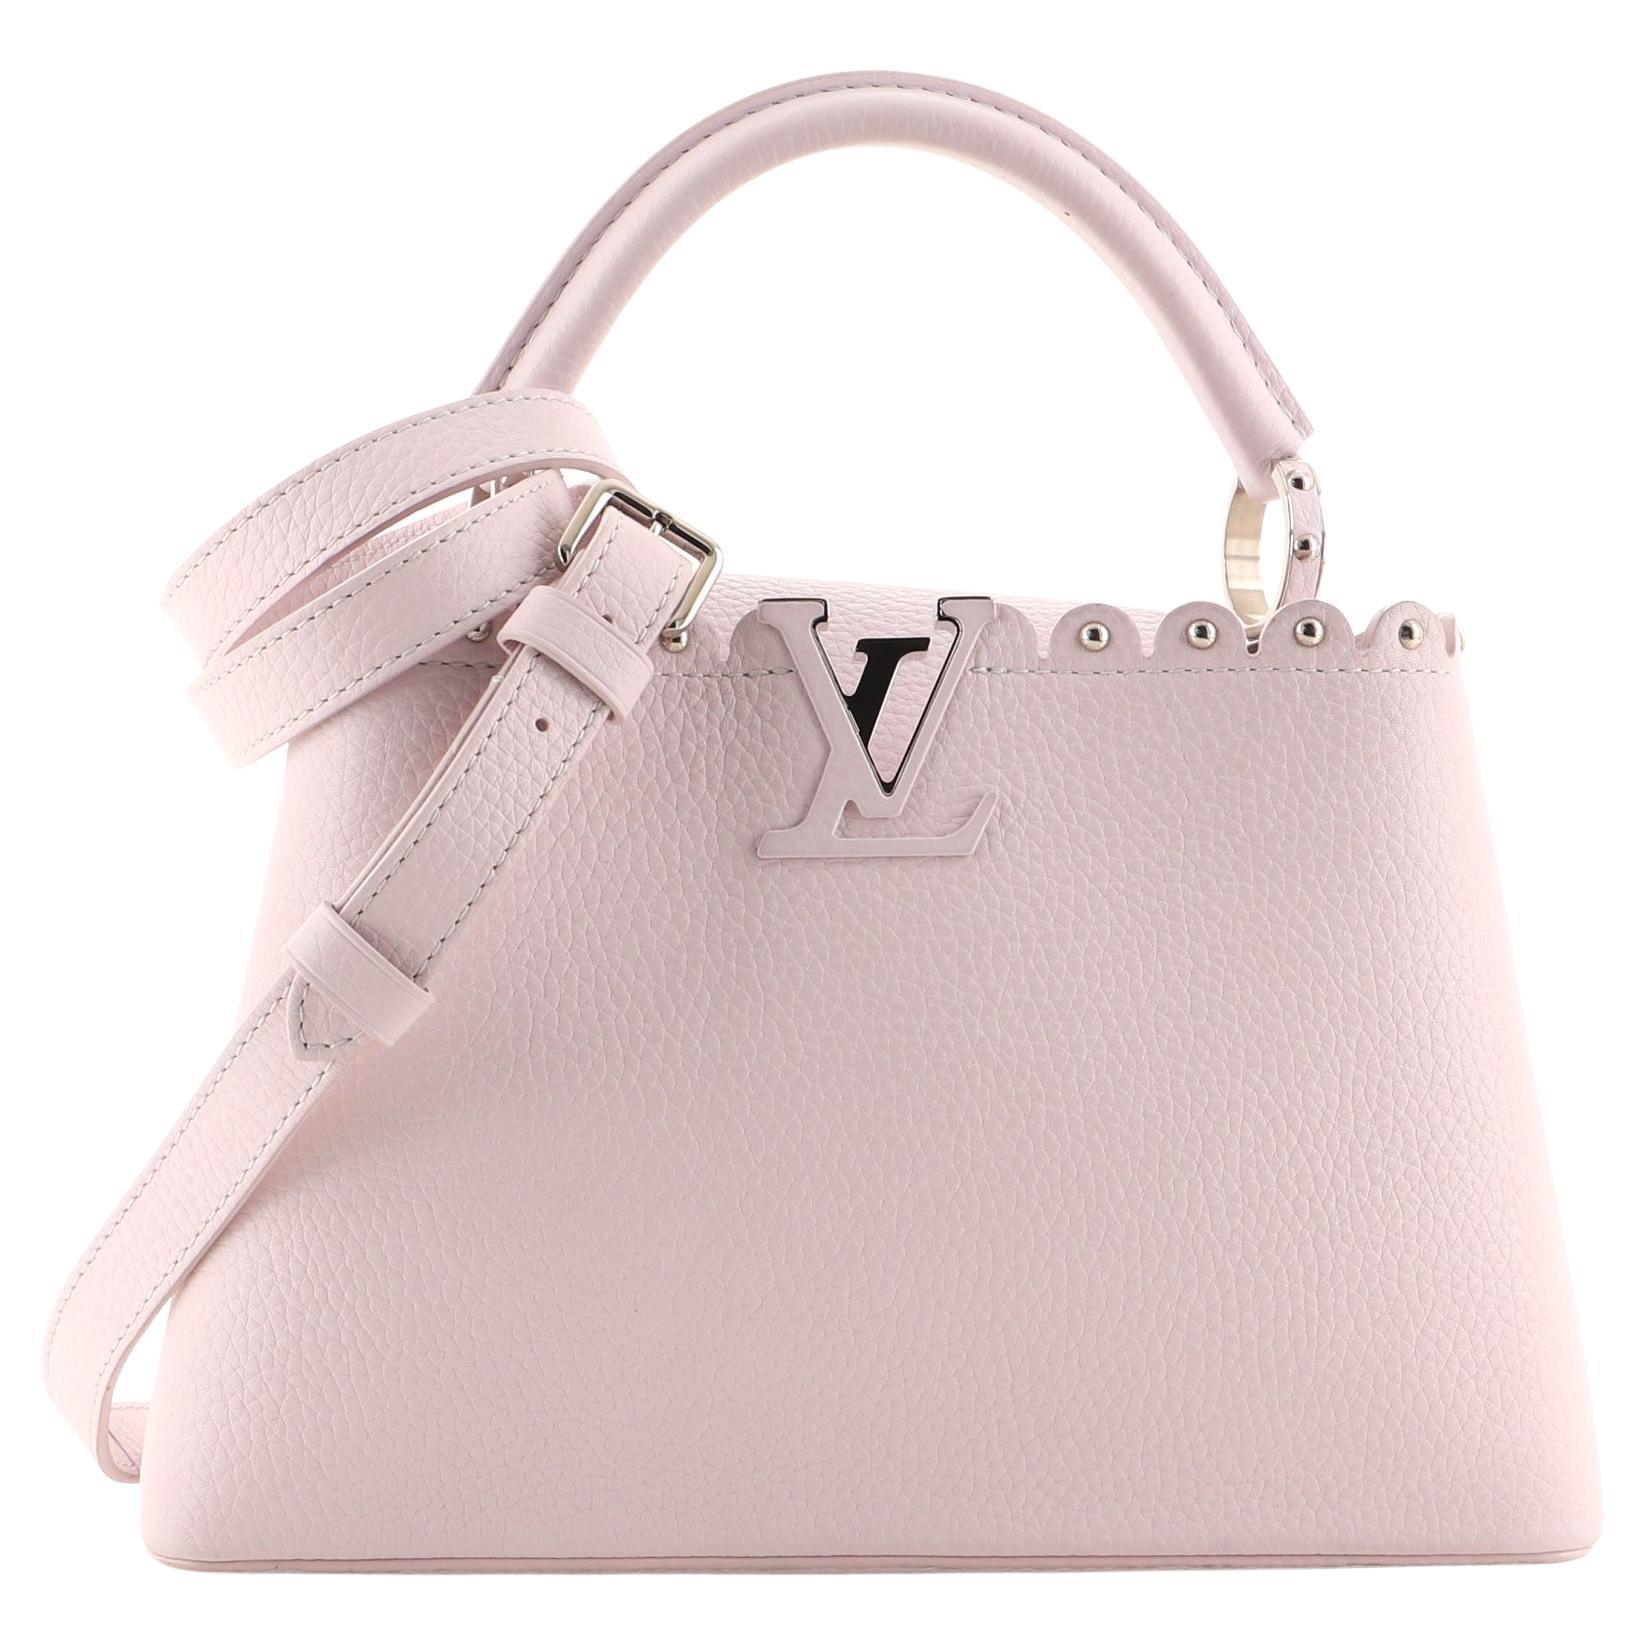 Louis Vuitton Capucines Bag Leather with Embellished Detail BB